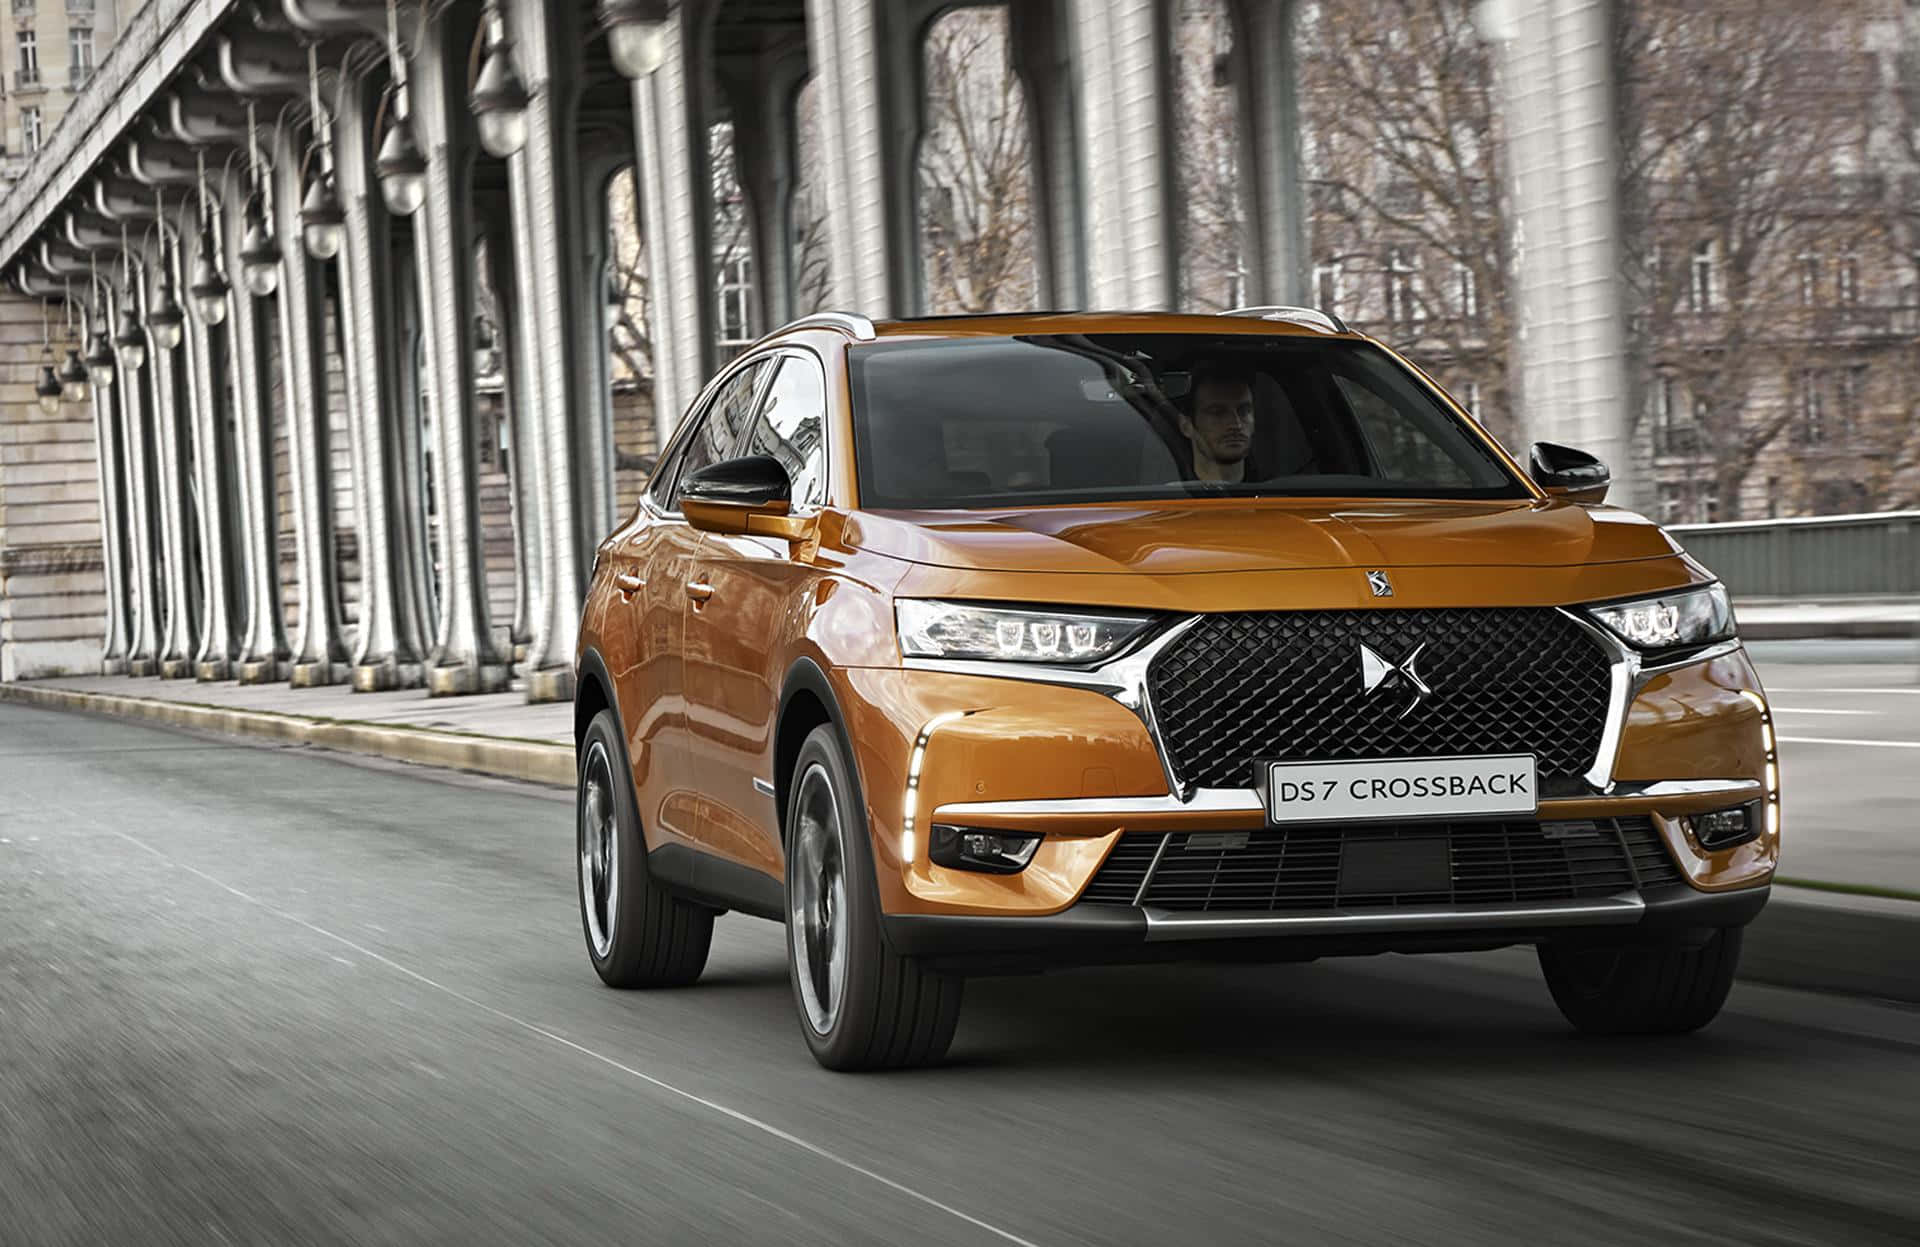 Dynamic Ds 7 Crossback E-tense In Action Wallpaper